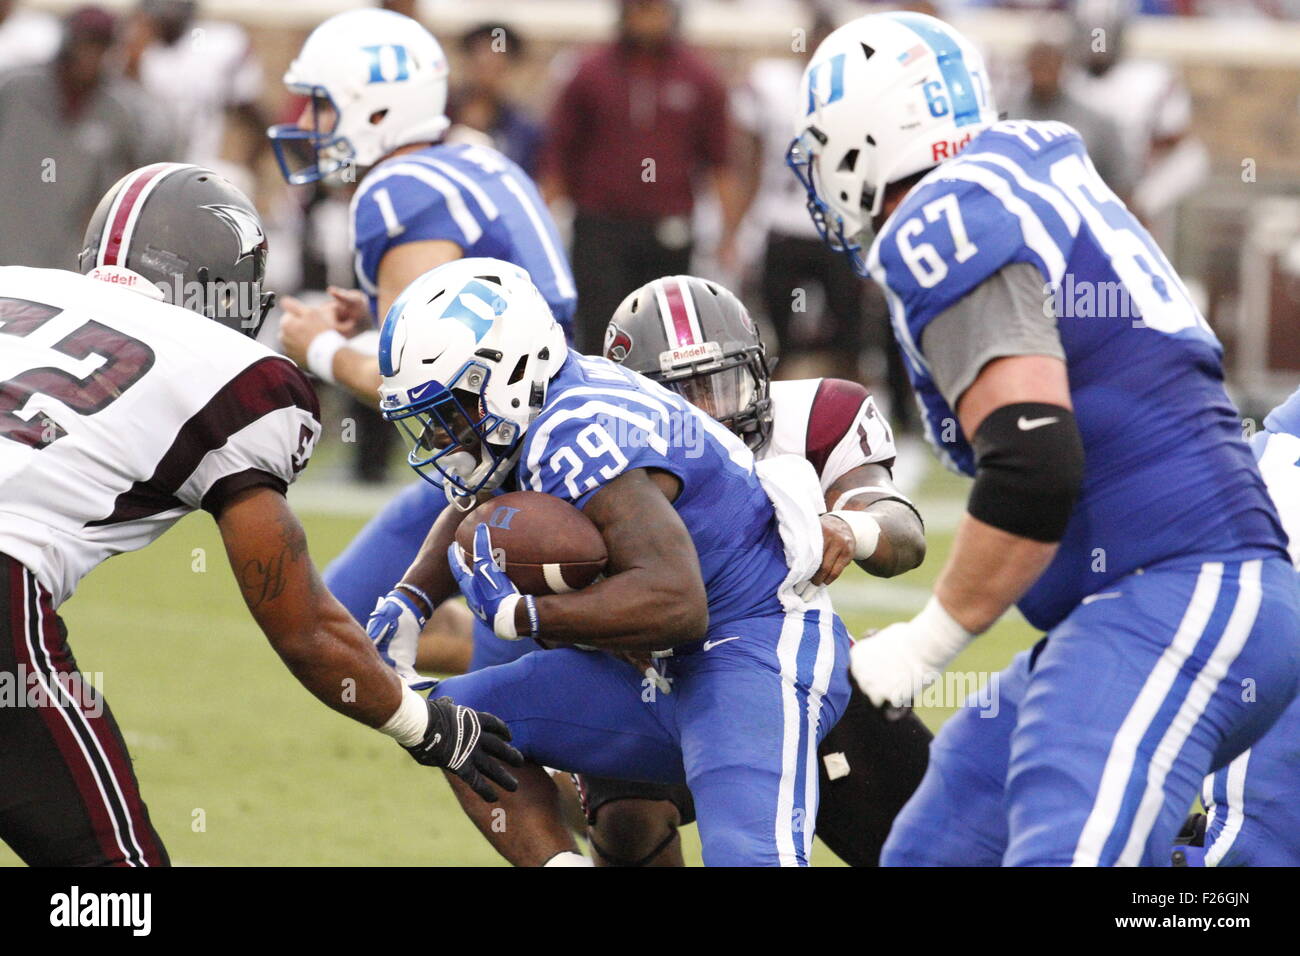 Durham, NC, USA. 12th Sep, 2015. Shaun Wilson (29) of the Duke Blue Devils driving the ball upfield during the NCAA football matchup between the NC Central Eagles and the Duke Blue Devils at Wallace Wade Stadium in Durham, NC. Scott Kinser/CSM/Alamy Live News Stock Photo